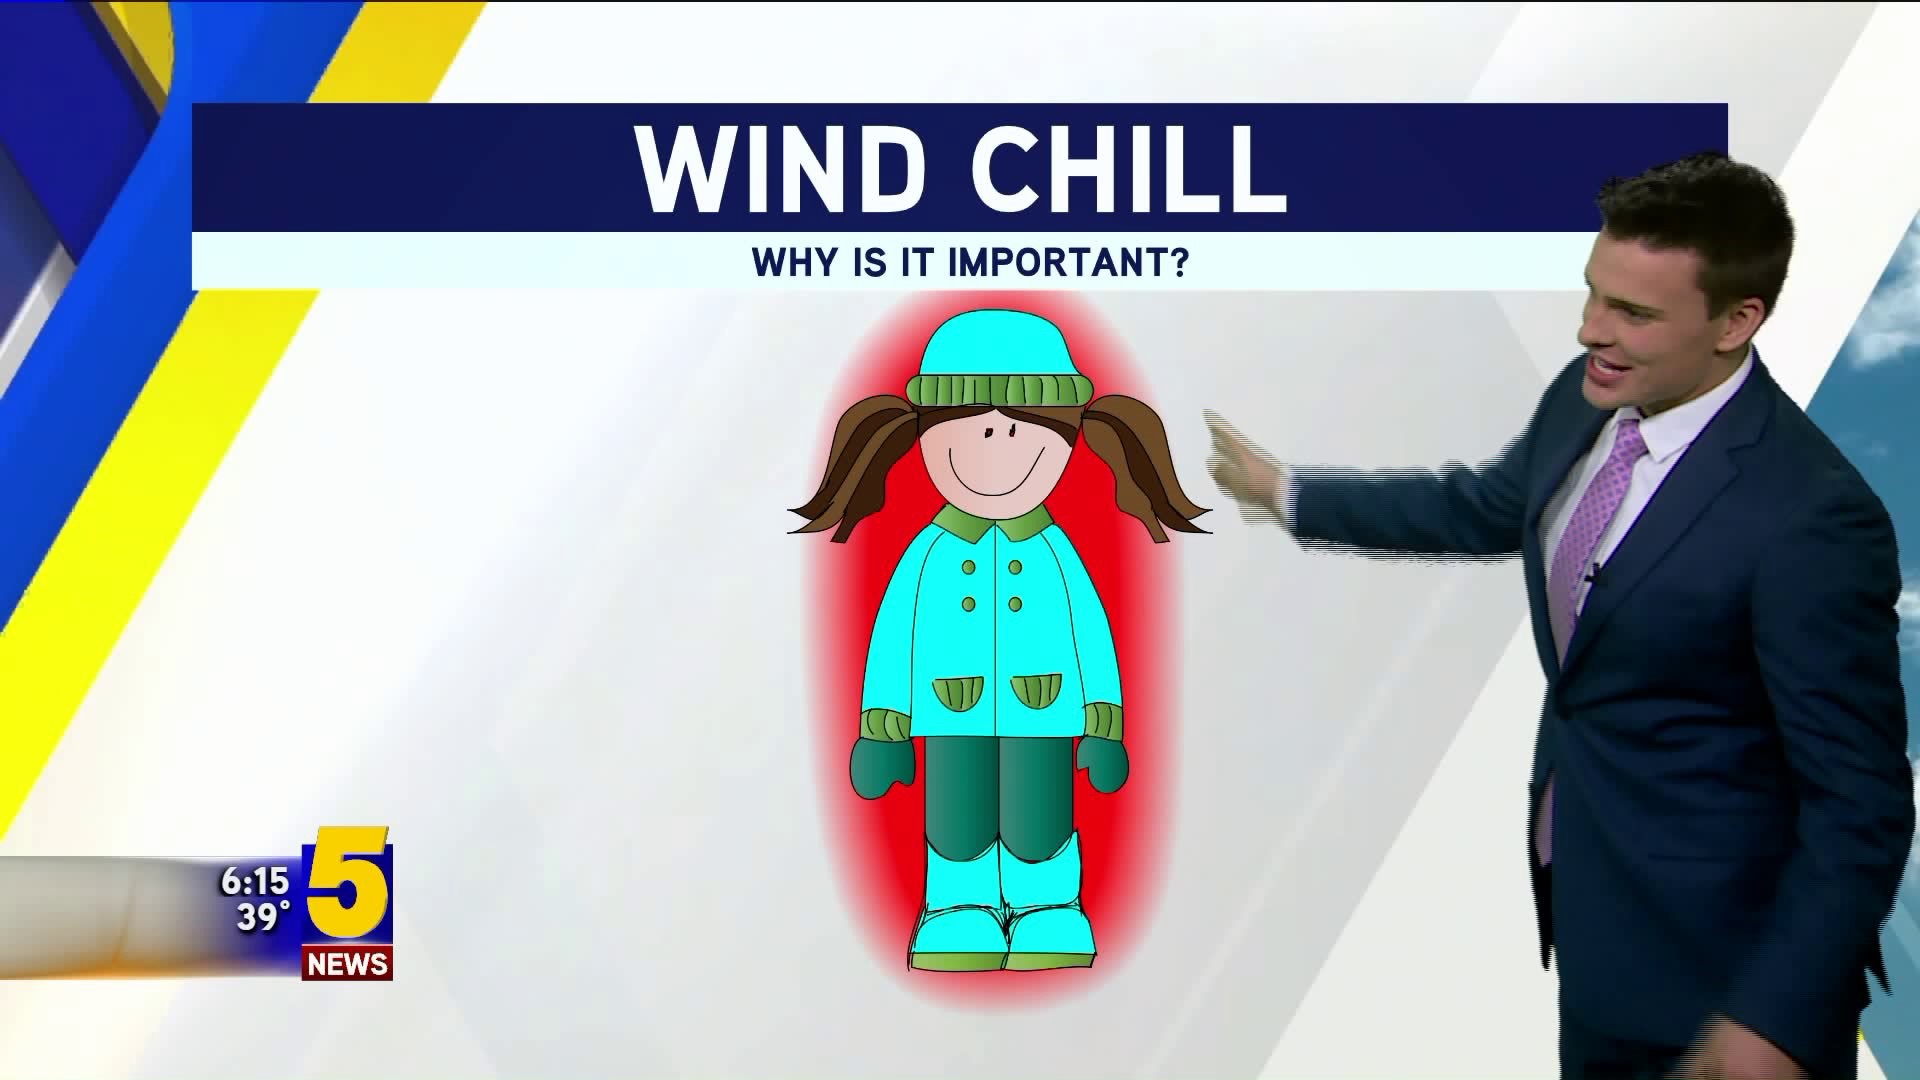 Why Is The Wind Chill Important?